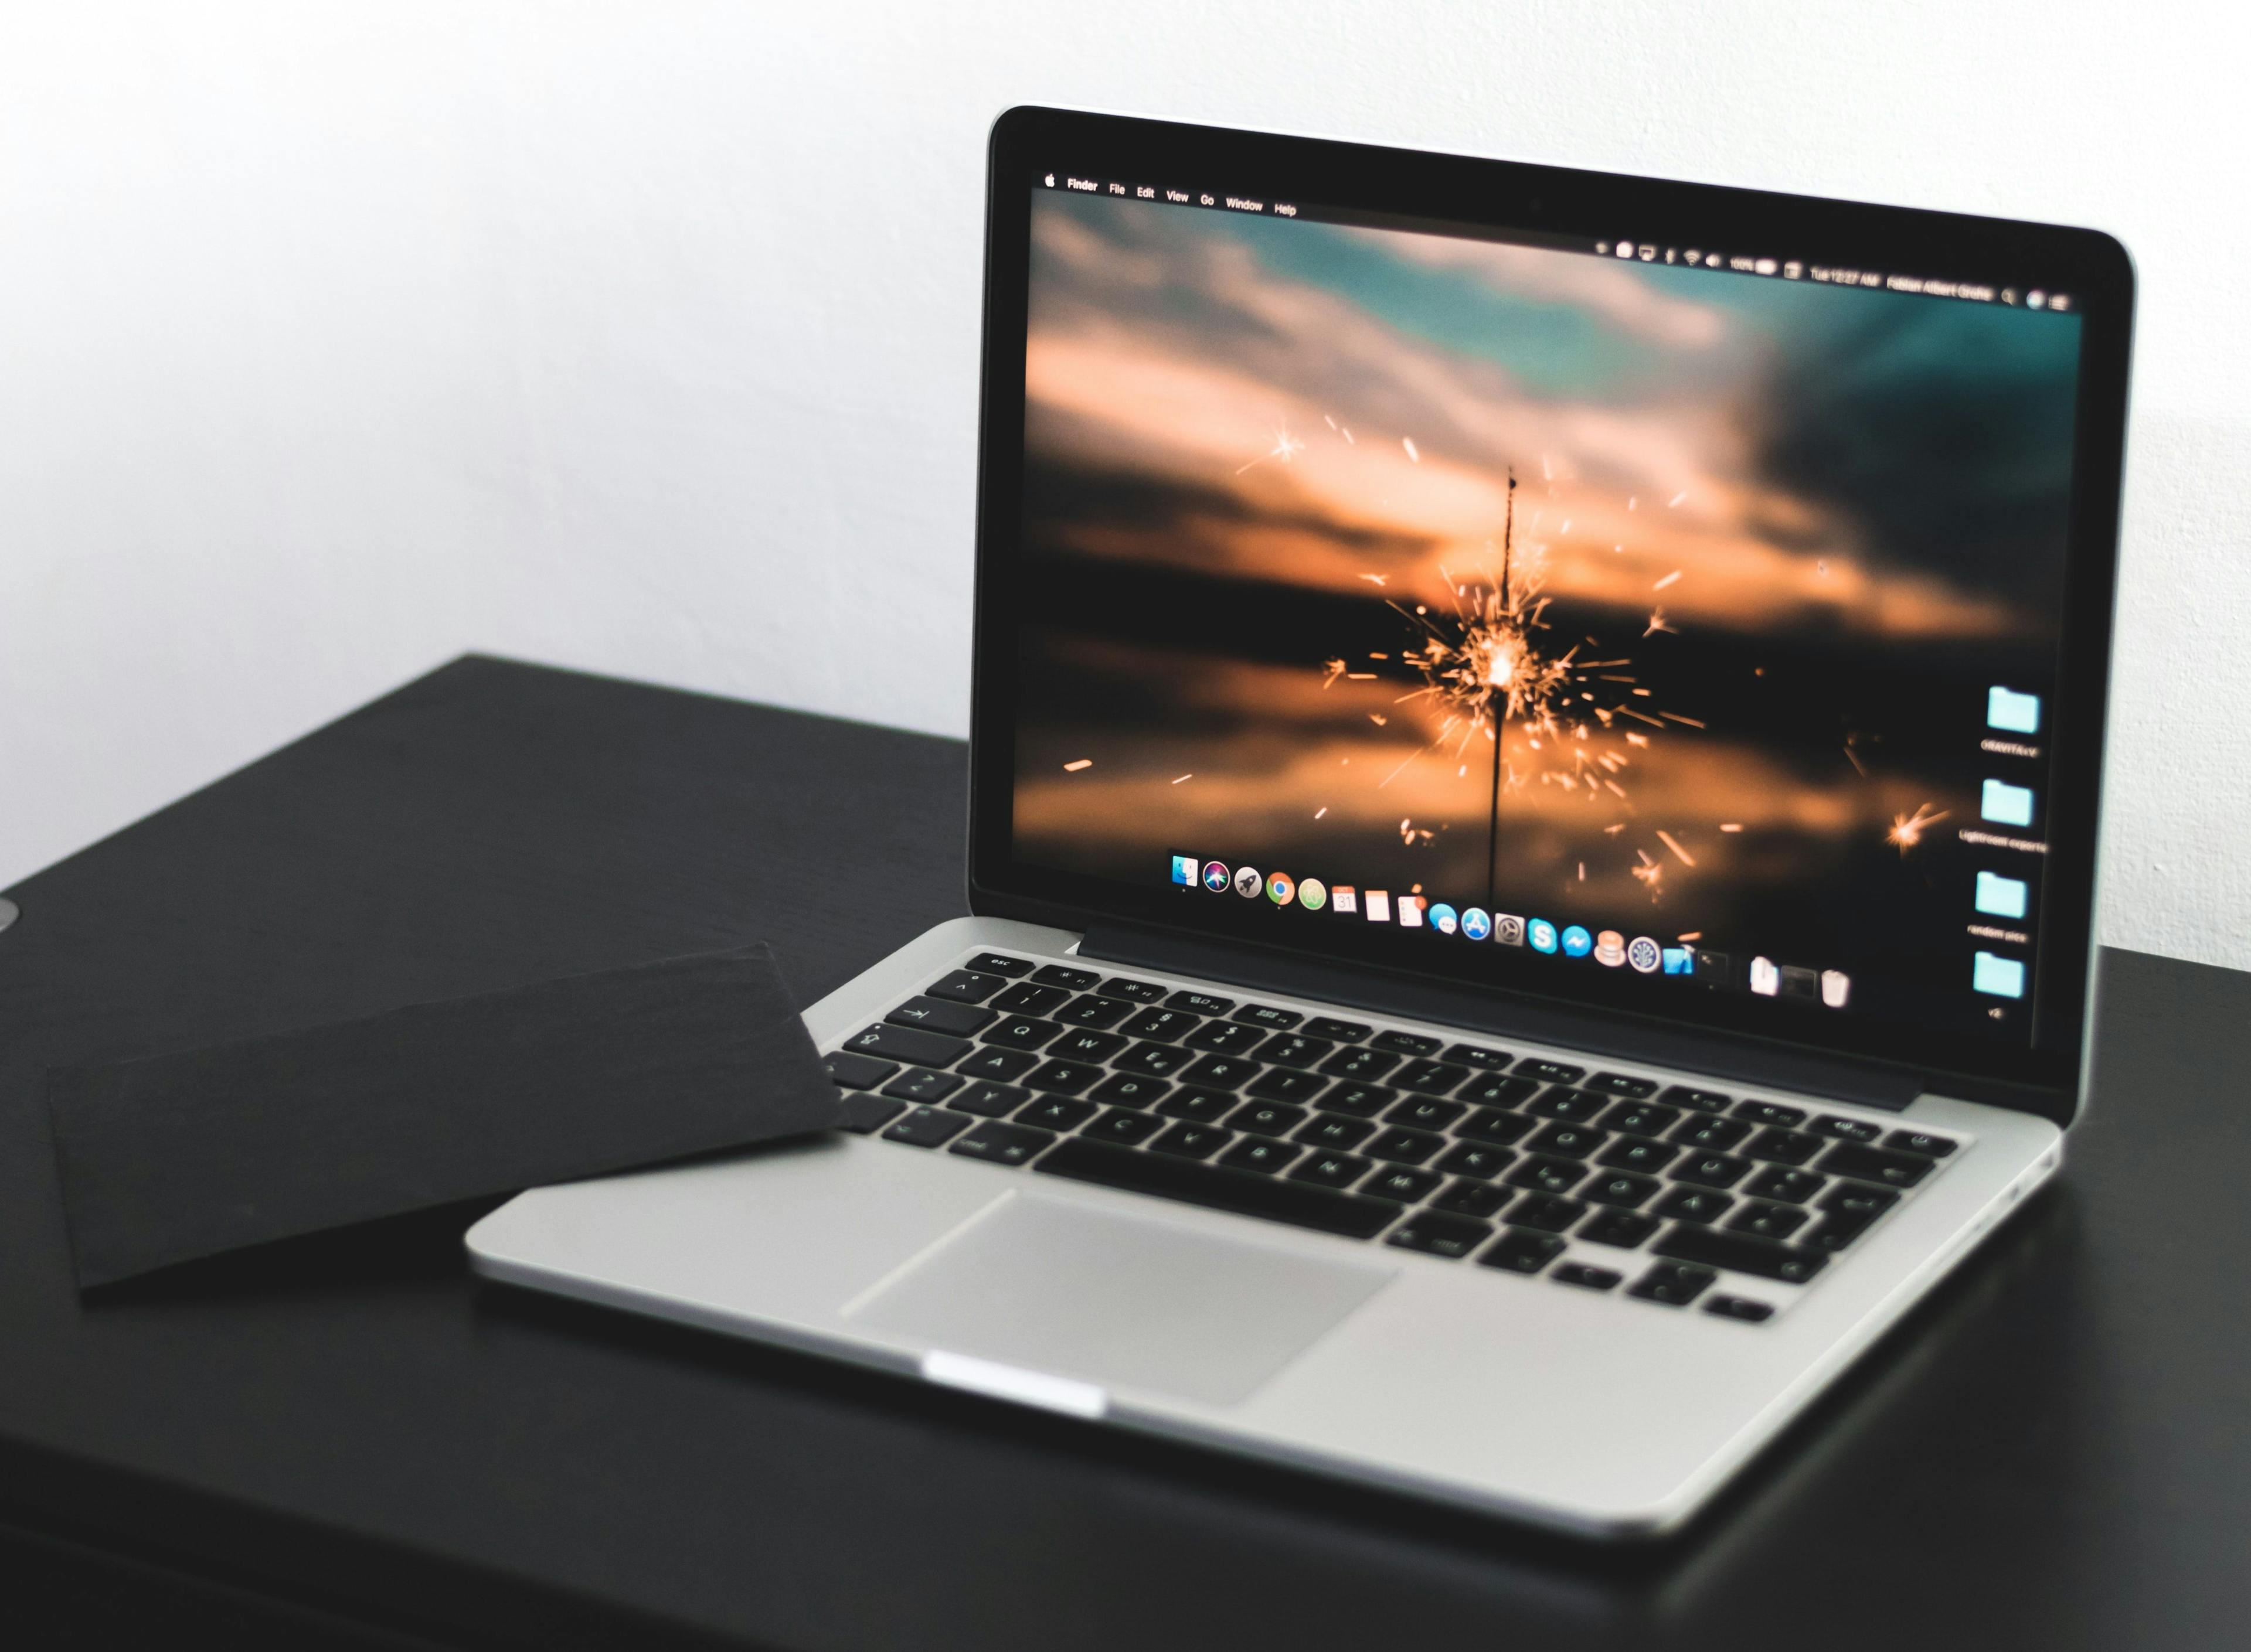 How to Record a video on Mac with QuickTime featured image